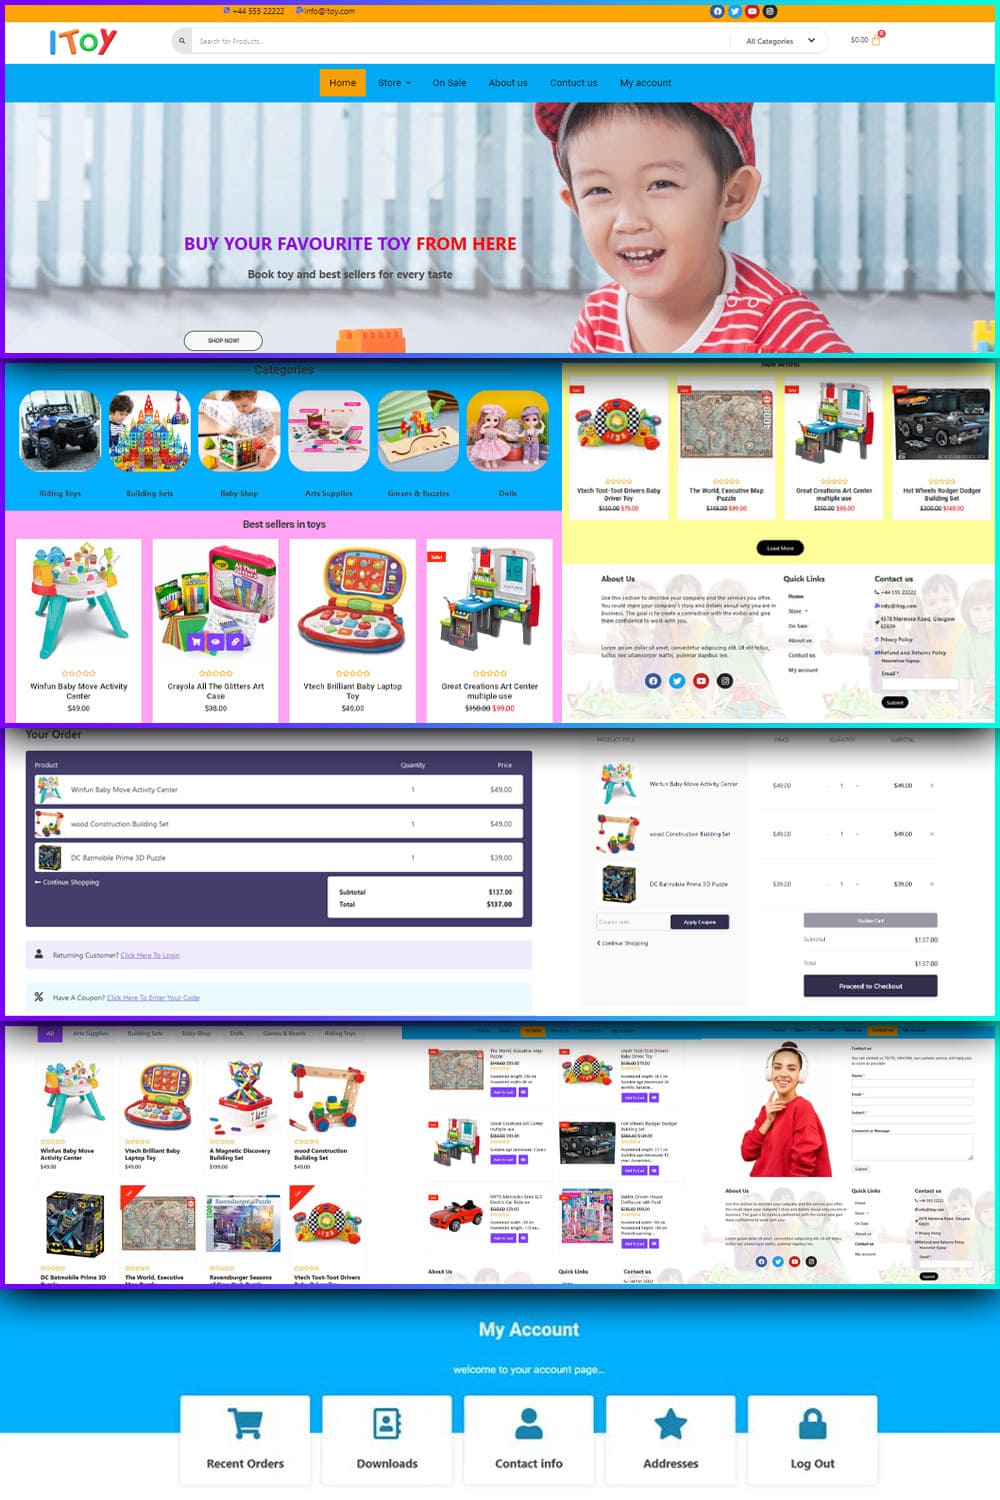 All pages of “I toy store woocommerce theme”.